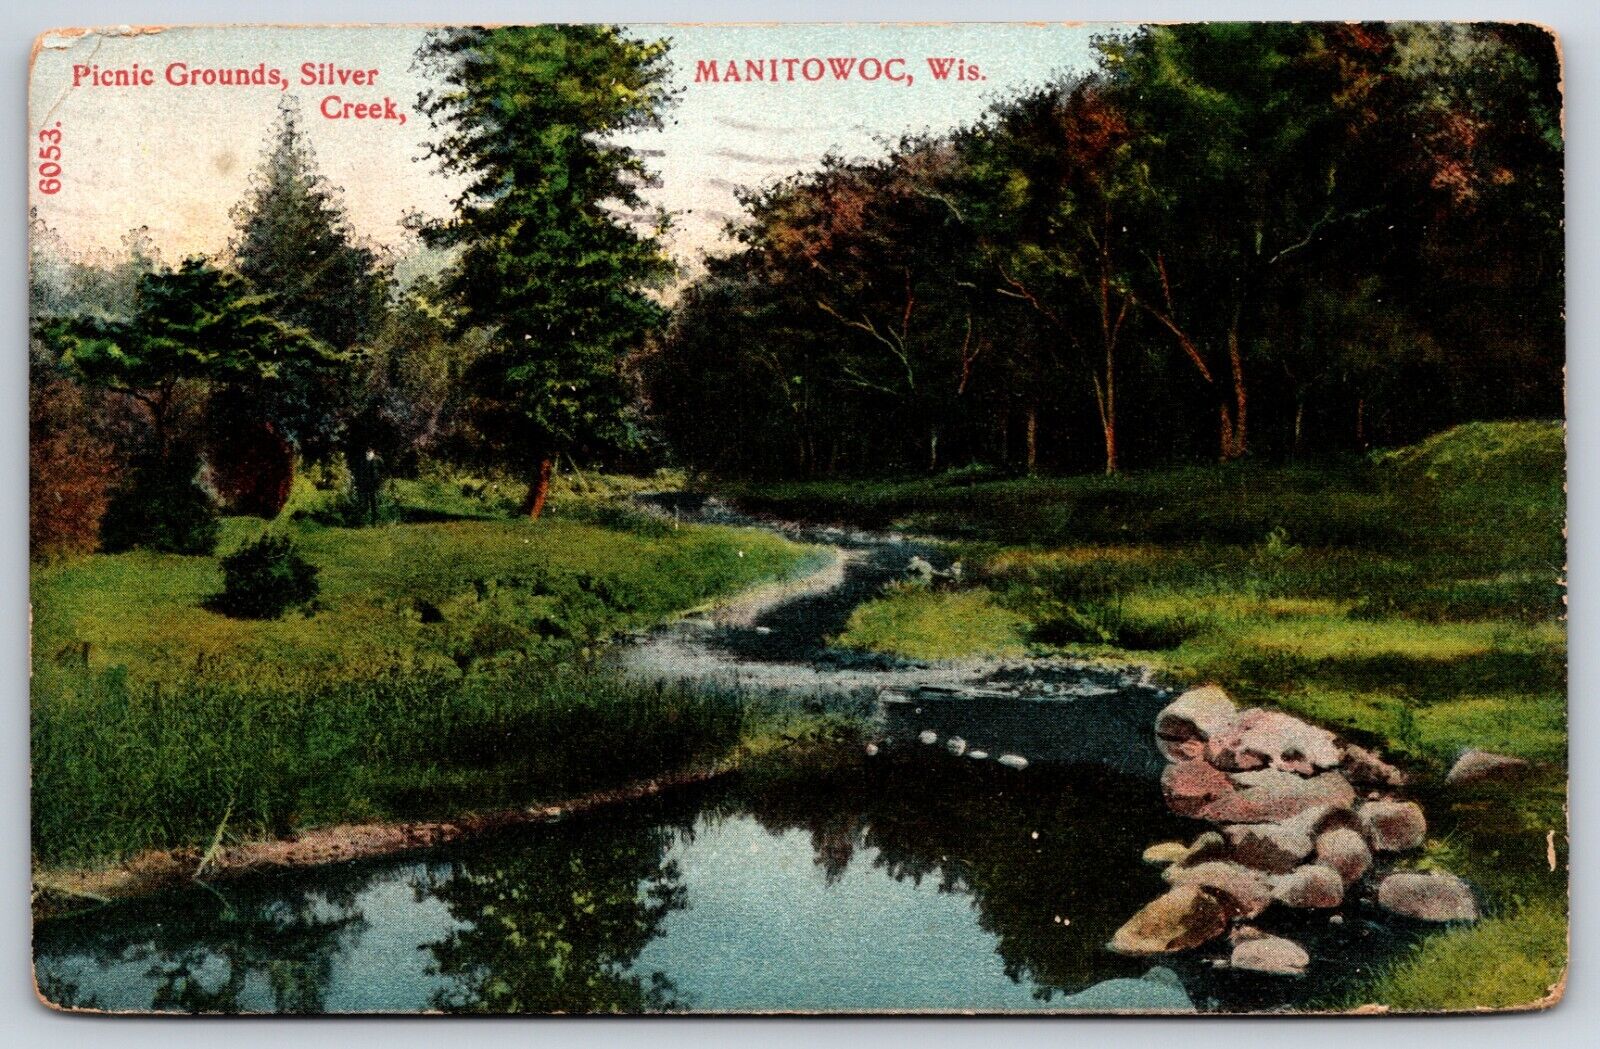 Postcard Picnic Grounds, Silver Creek, Manitowoc, Wisconsin Posted ca 1907